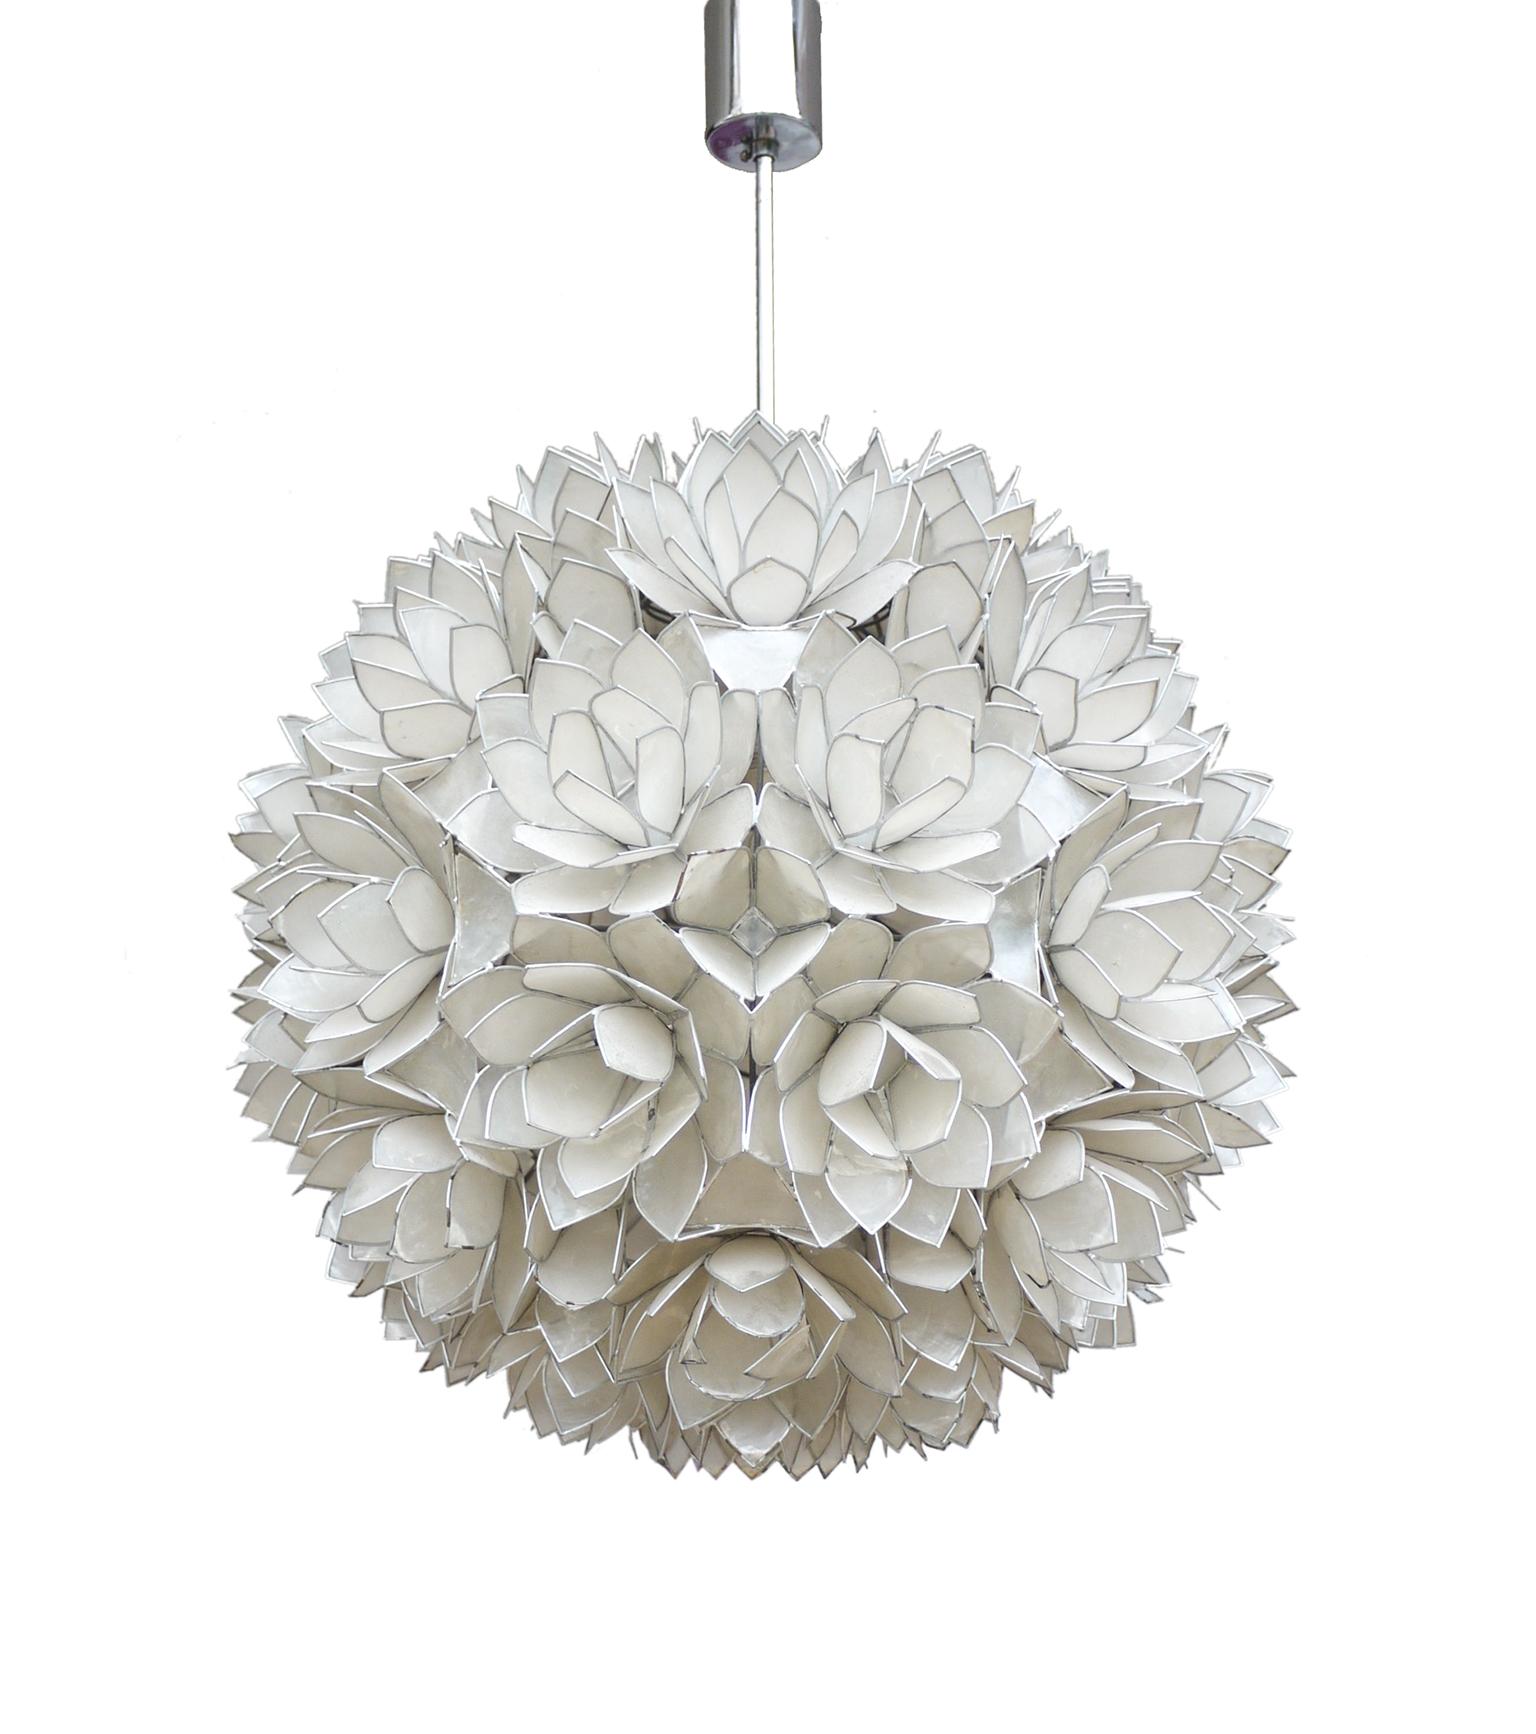 Elegant large globular pendant light made in the 1960s. Handcrafted and assembled in a lotus flower pattern. 

Measures: diameter 19.7” (55 cm), height 31.5